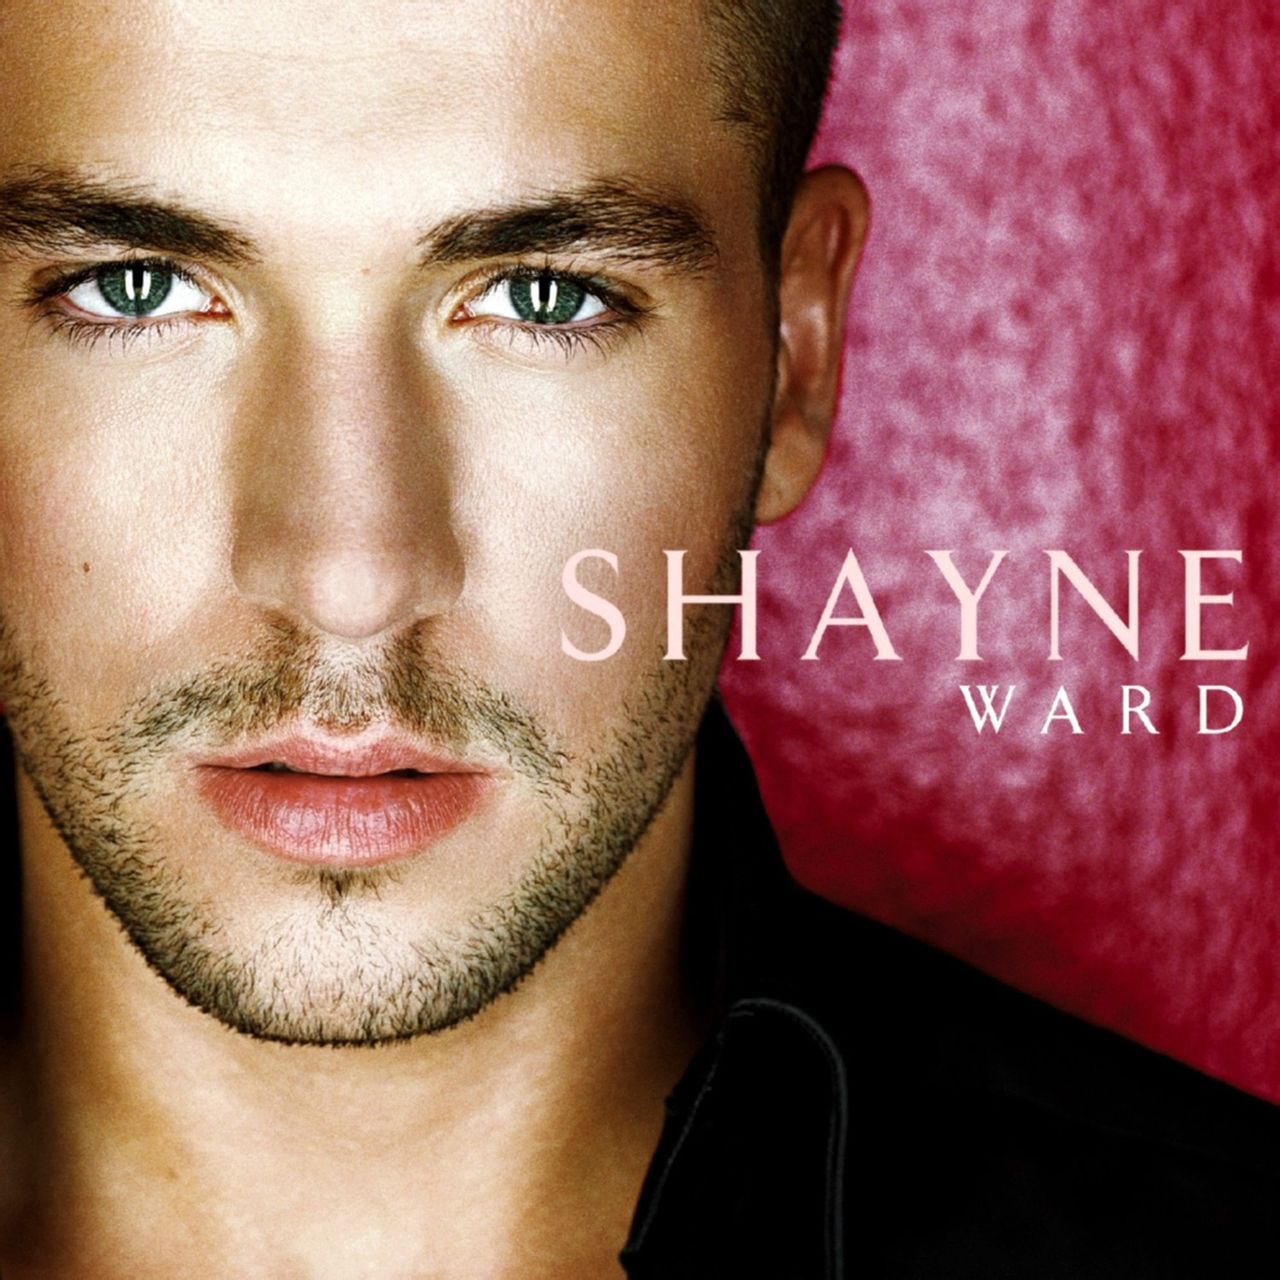 Stand by me(Stand By Me (Shayne Ward))